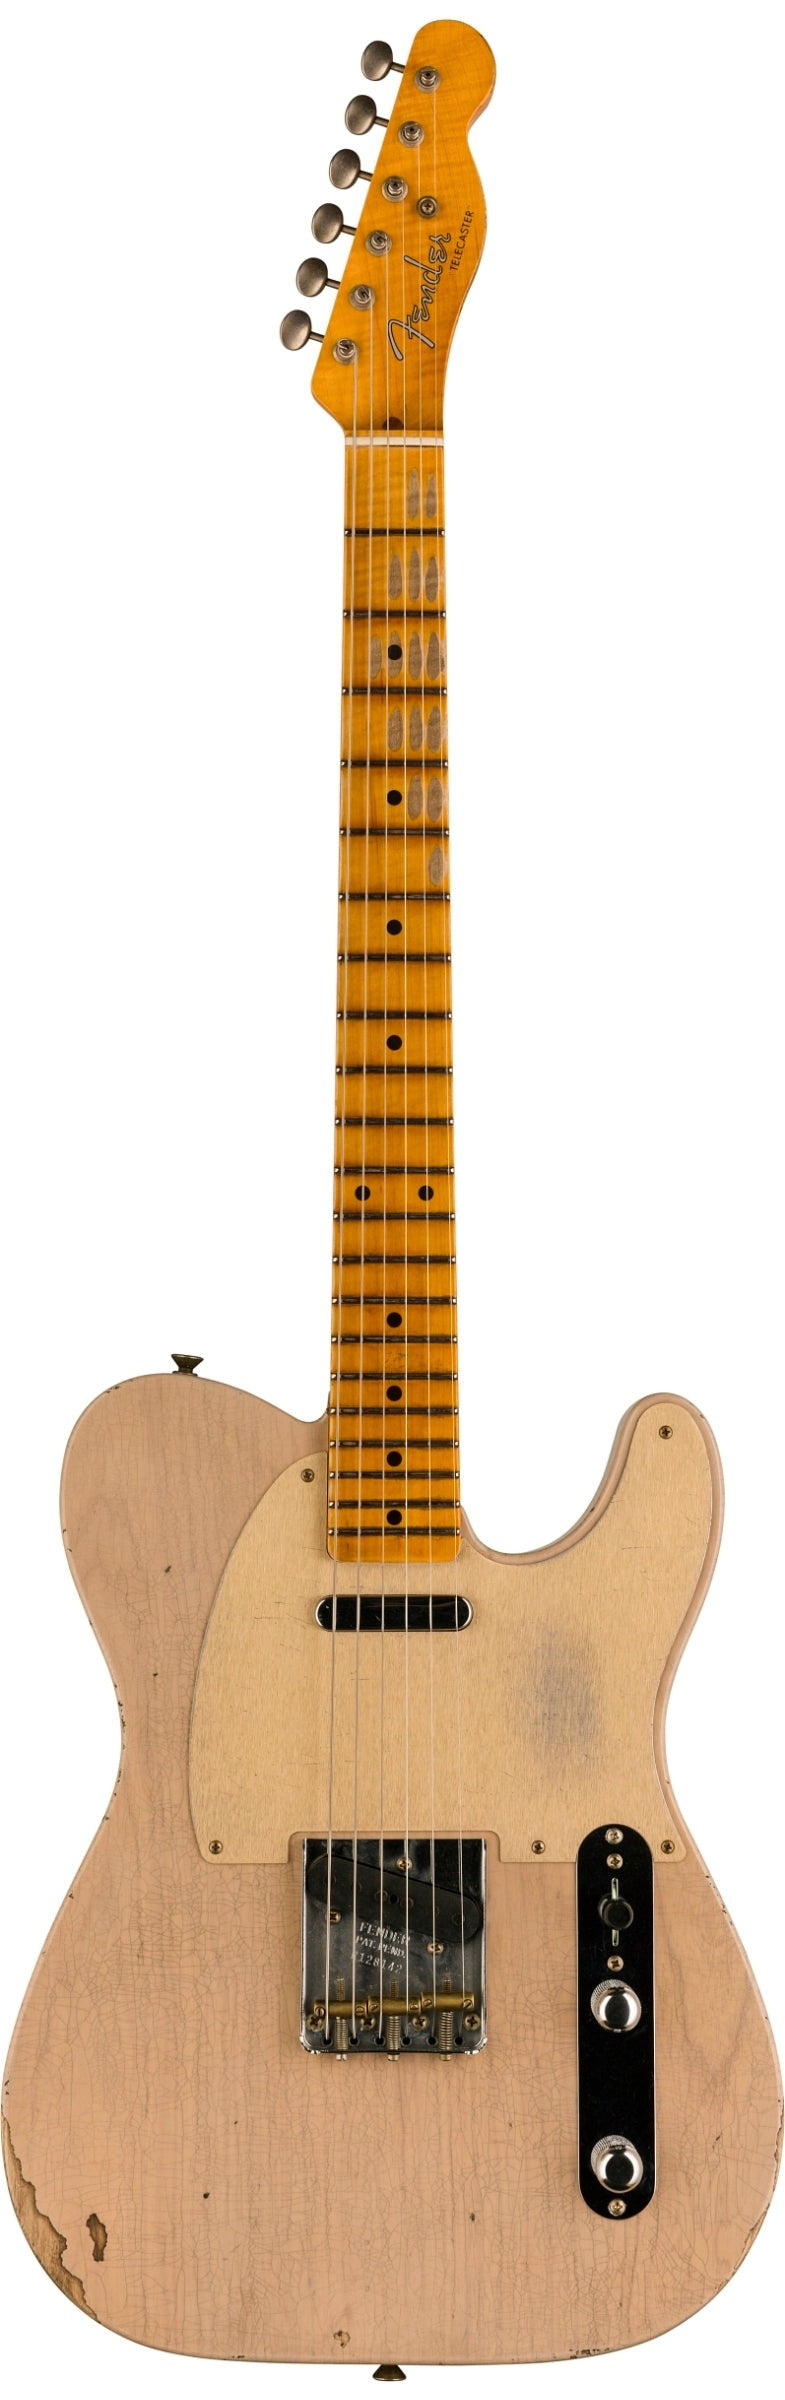 FENDER LIMITED EDITION '53 TELE® - RELIC®, DIRTY WHITE BLONDE